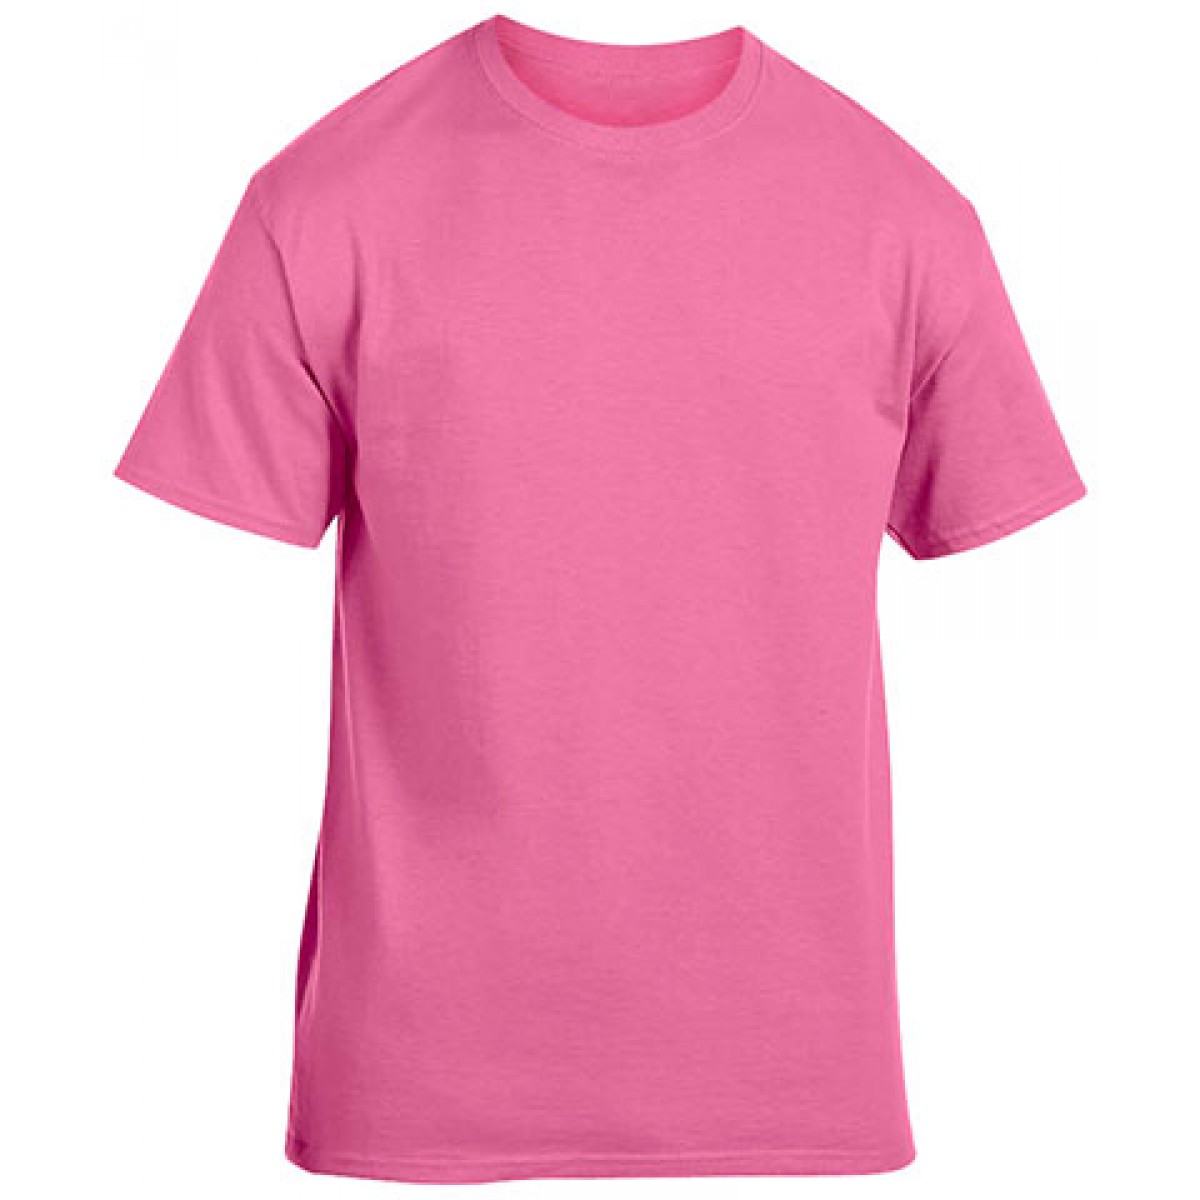 Heavy Cotton Activewear T-Shirt-Safety Pink-XL